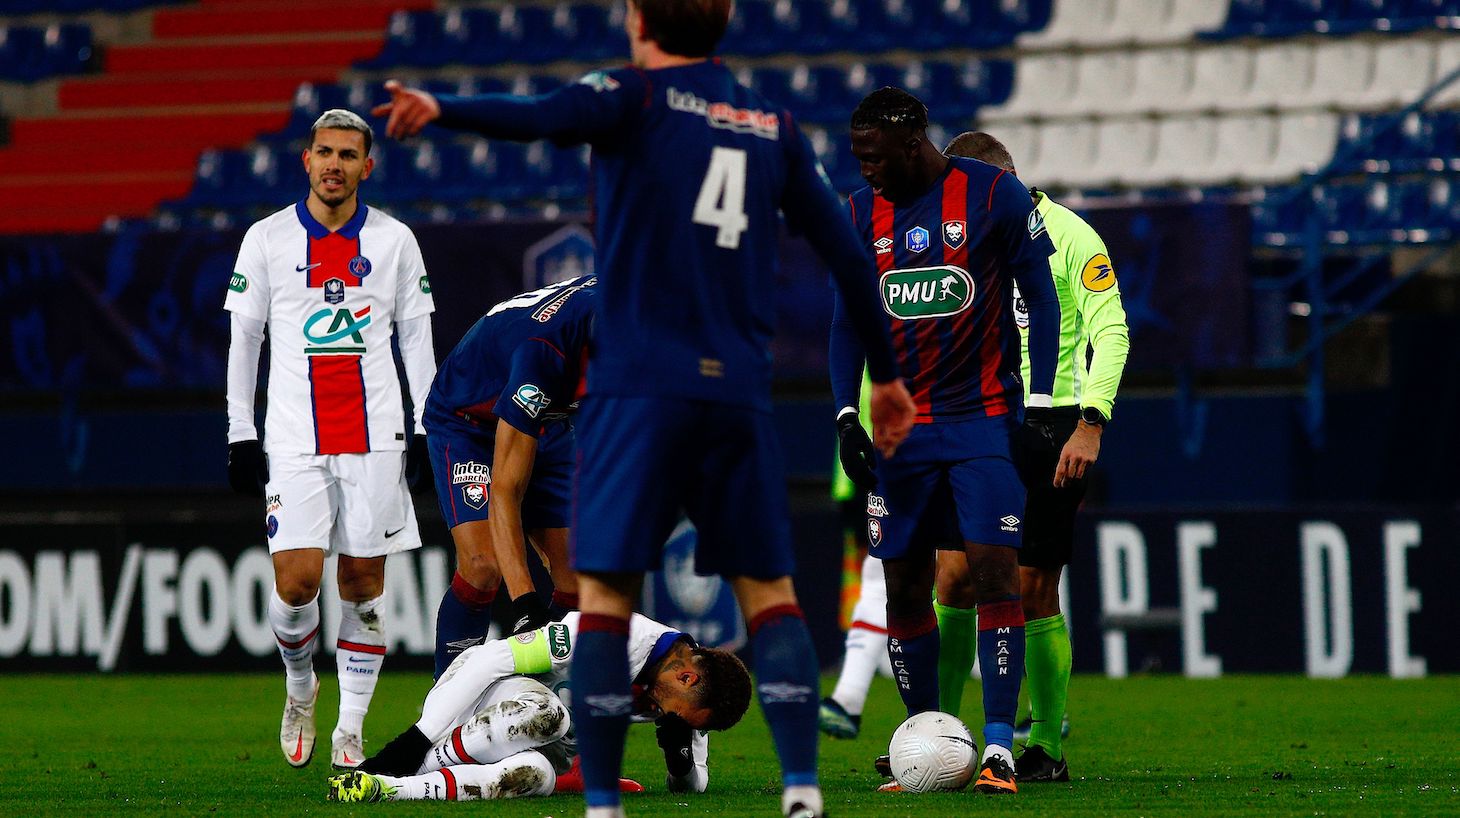 Paris Saint-Germain's Brazilian forward Neymar (3rd-L) reacts on the lawn during the French Cup round-of-64 football match between Stade Malherbe Caen and Paris Saint-Germain at the Michel-d'Ornano Stadium in Caen, northwestern France on February 10, 2021.